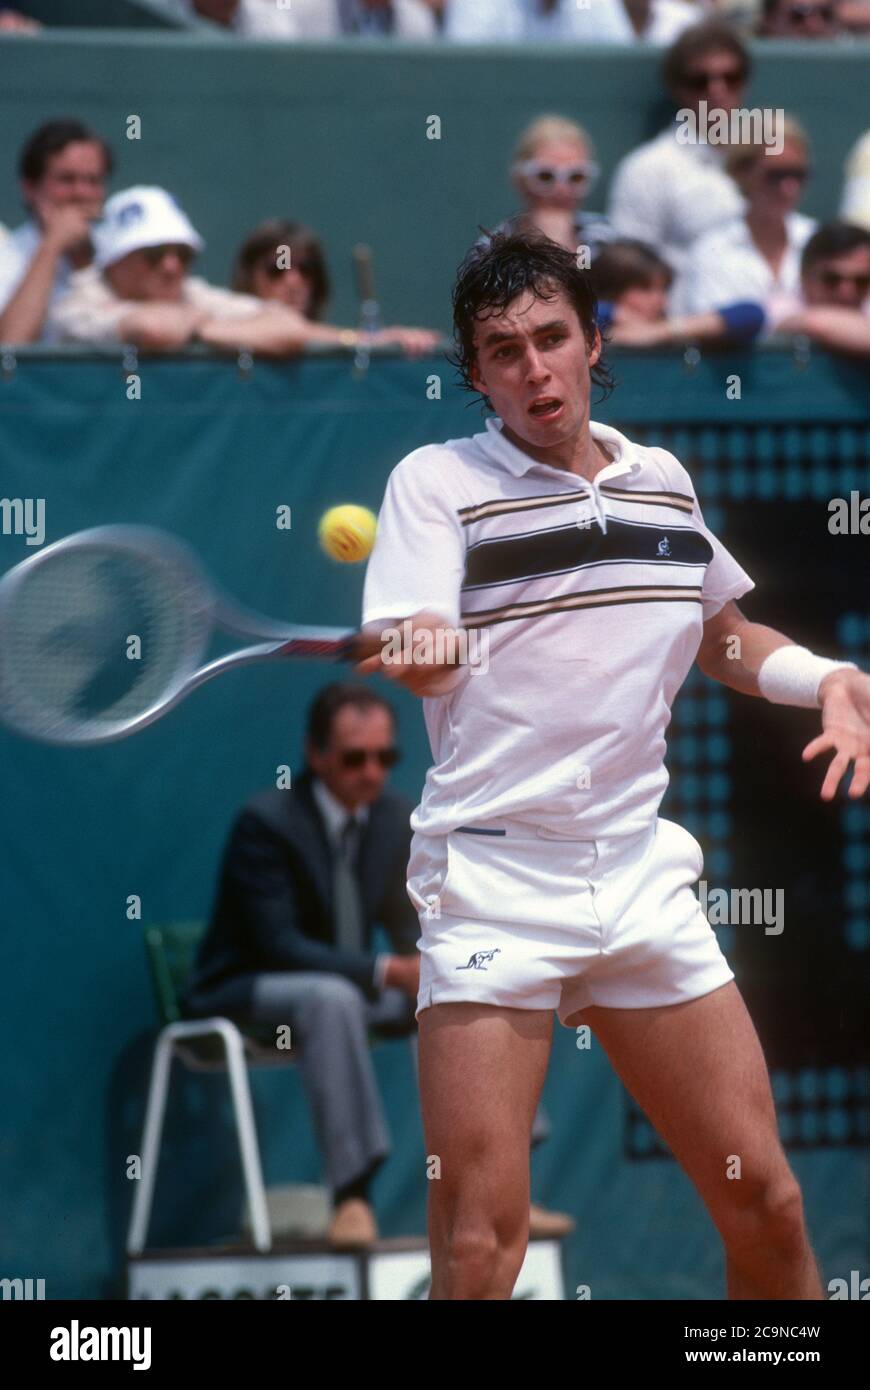 Ivan Lendl strokes a forehand during a match at the 1981 French Open at Roland Garros, the year Lendl reached his first grand slam final losing to Bjorn Borg in five sets. Stock Photo